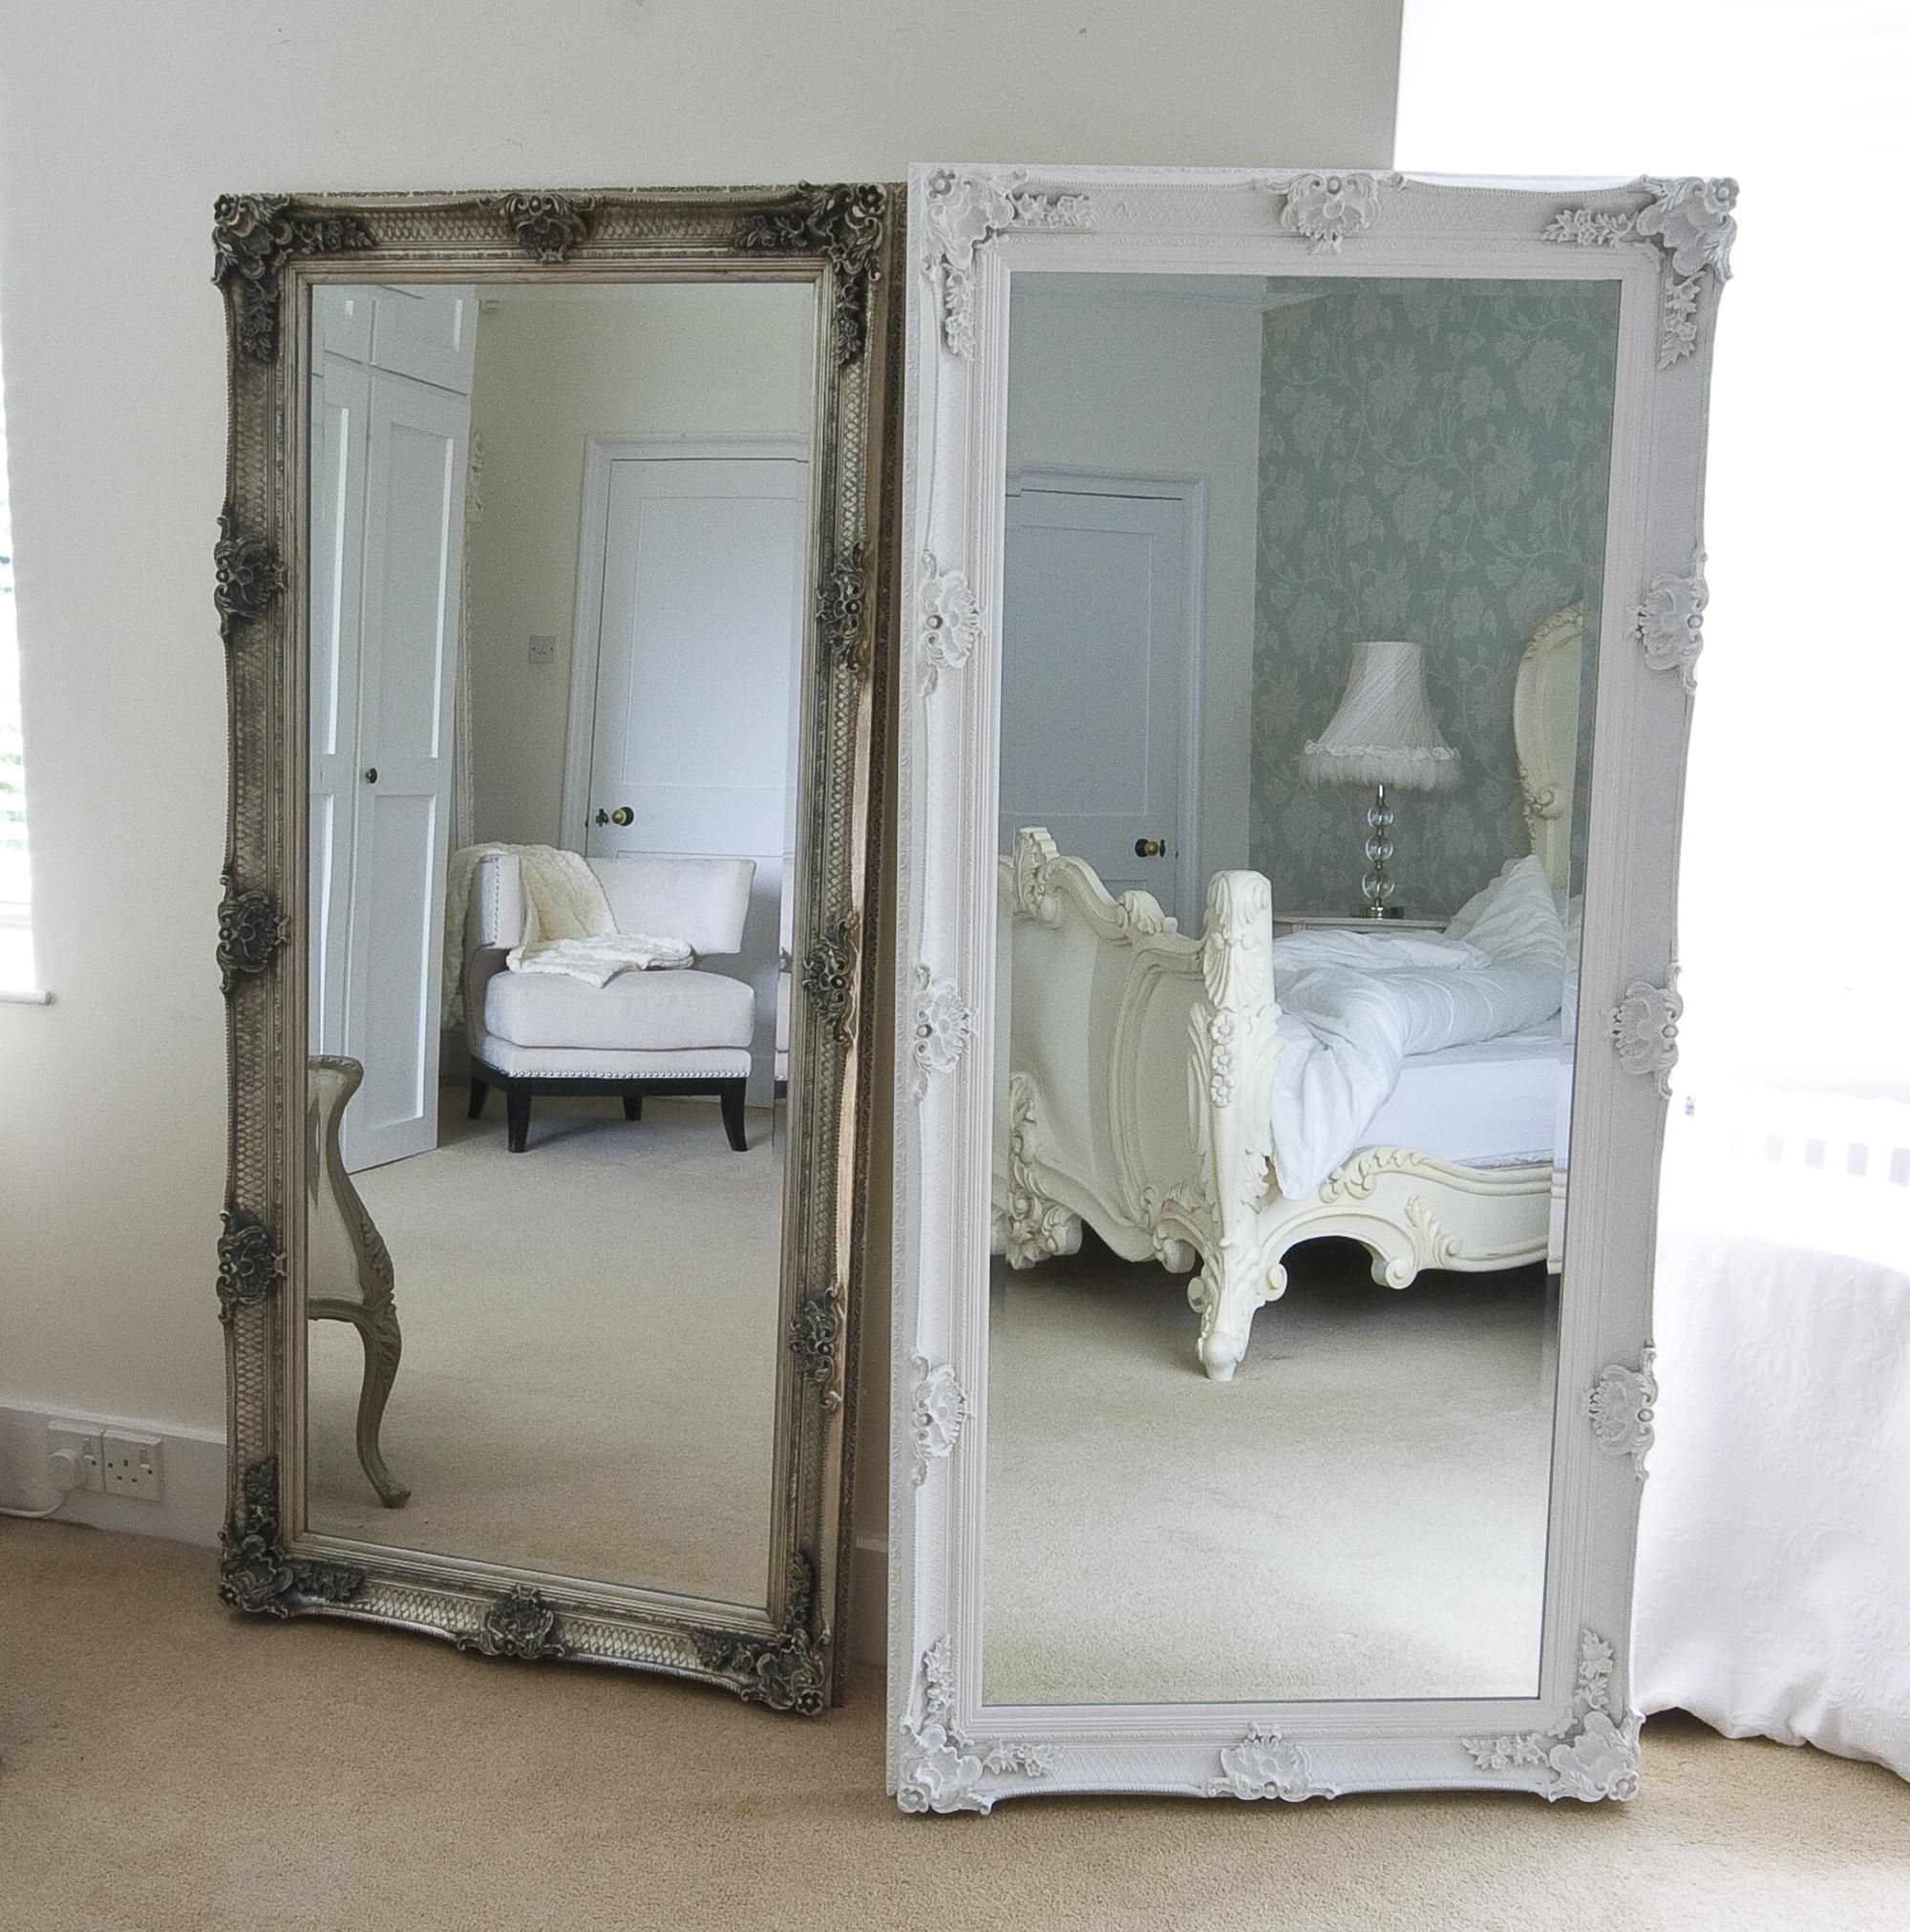 Full Length Mirrors. Gallery Of Wall Mirrors Full Length (View 6 of 20)